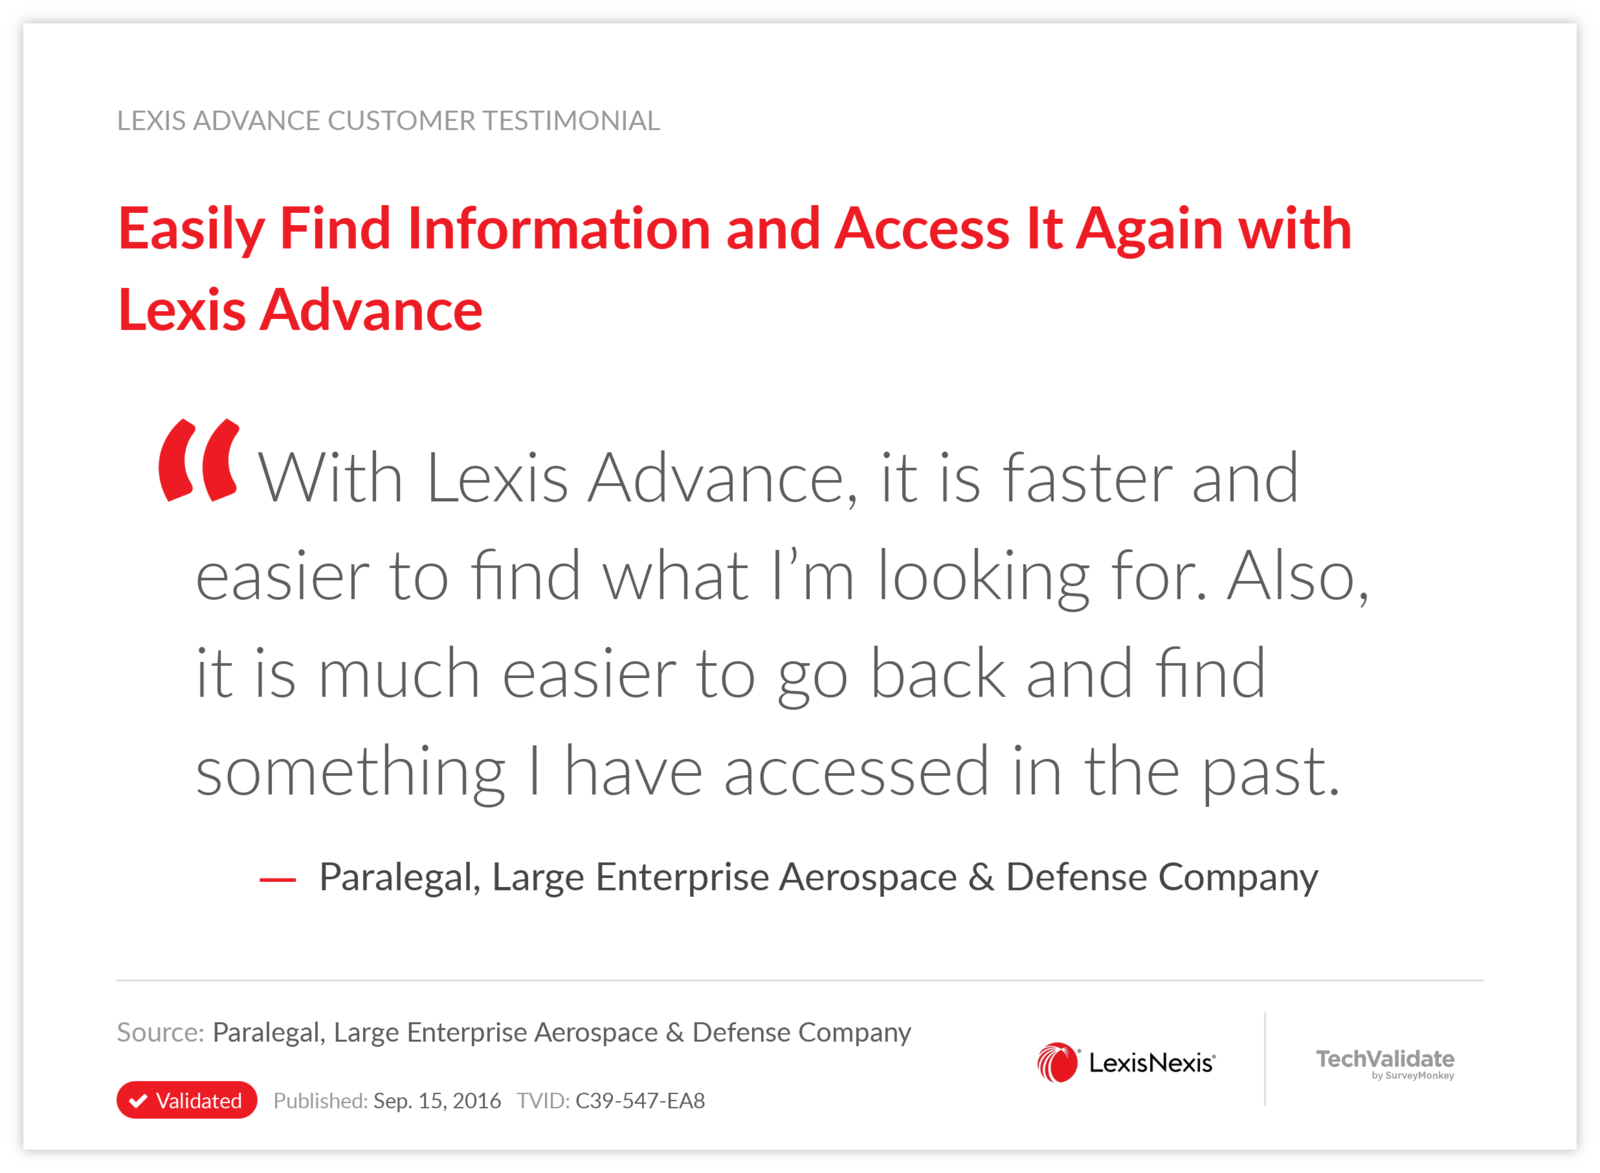 Easily Find Information and Access It Again with Lexis Advance